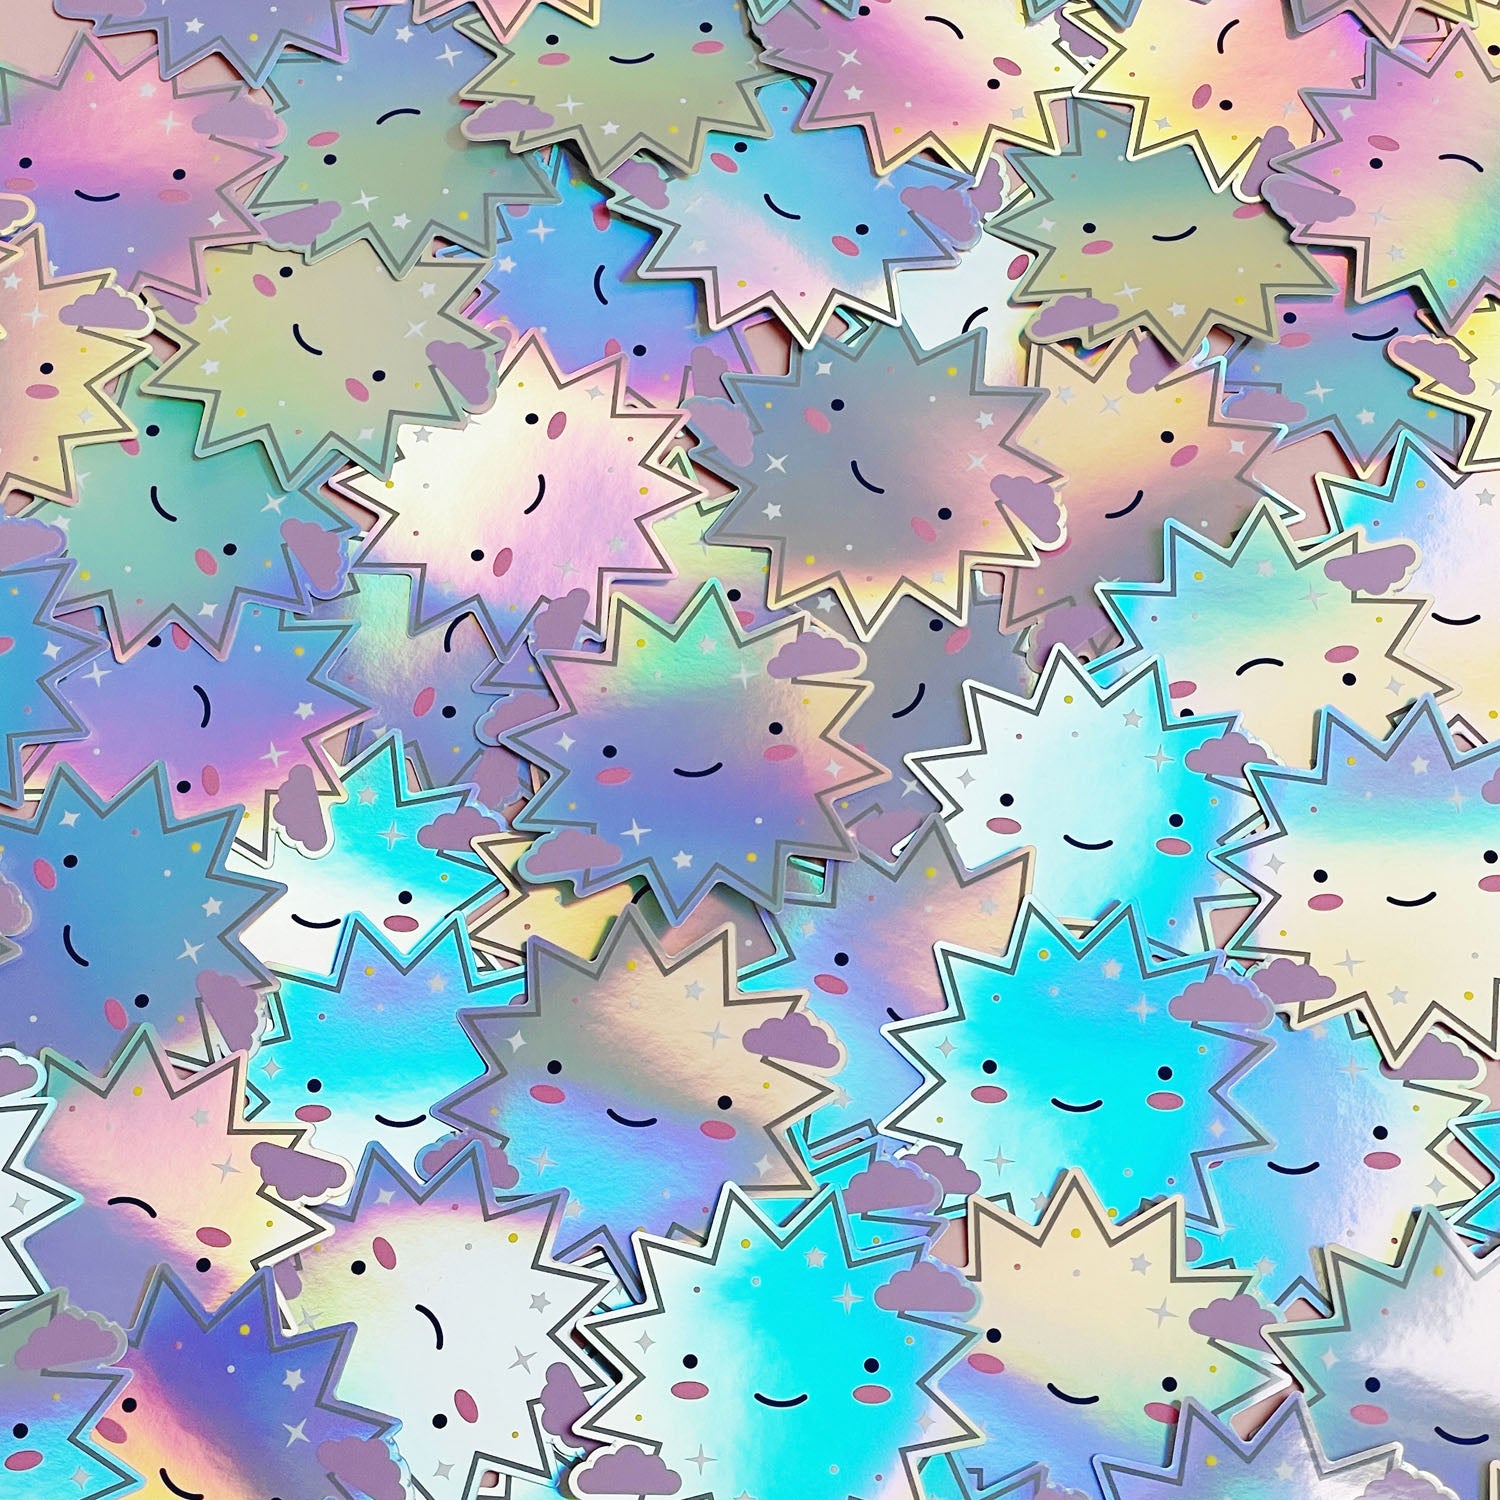 A pile of shiny iridescent holographic vinyl sticker featuring a smiling starburst. The surface is covered with dozens of the same design.